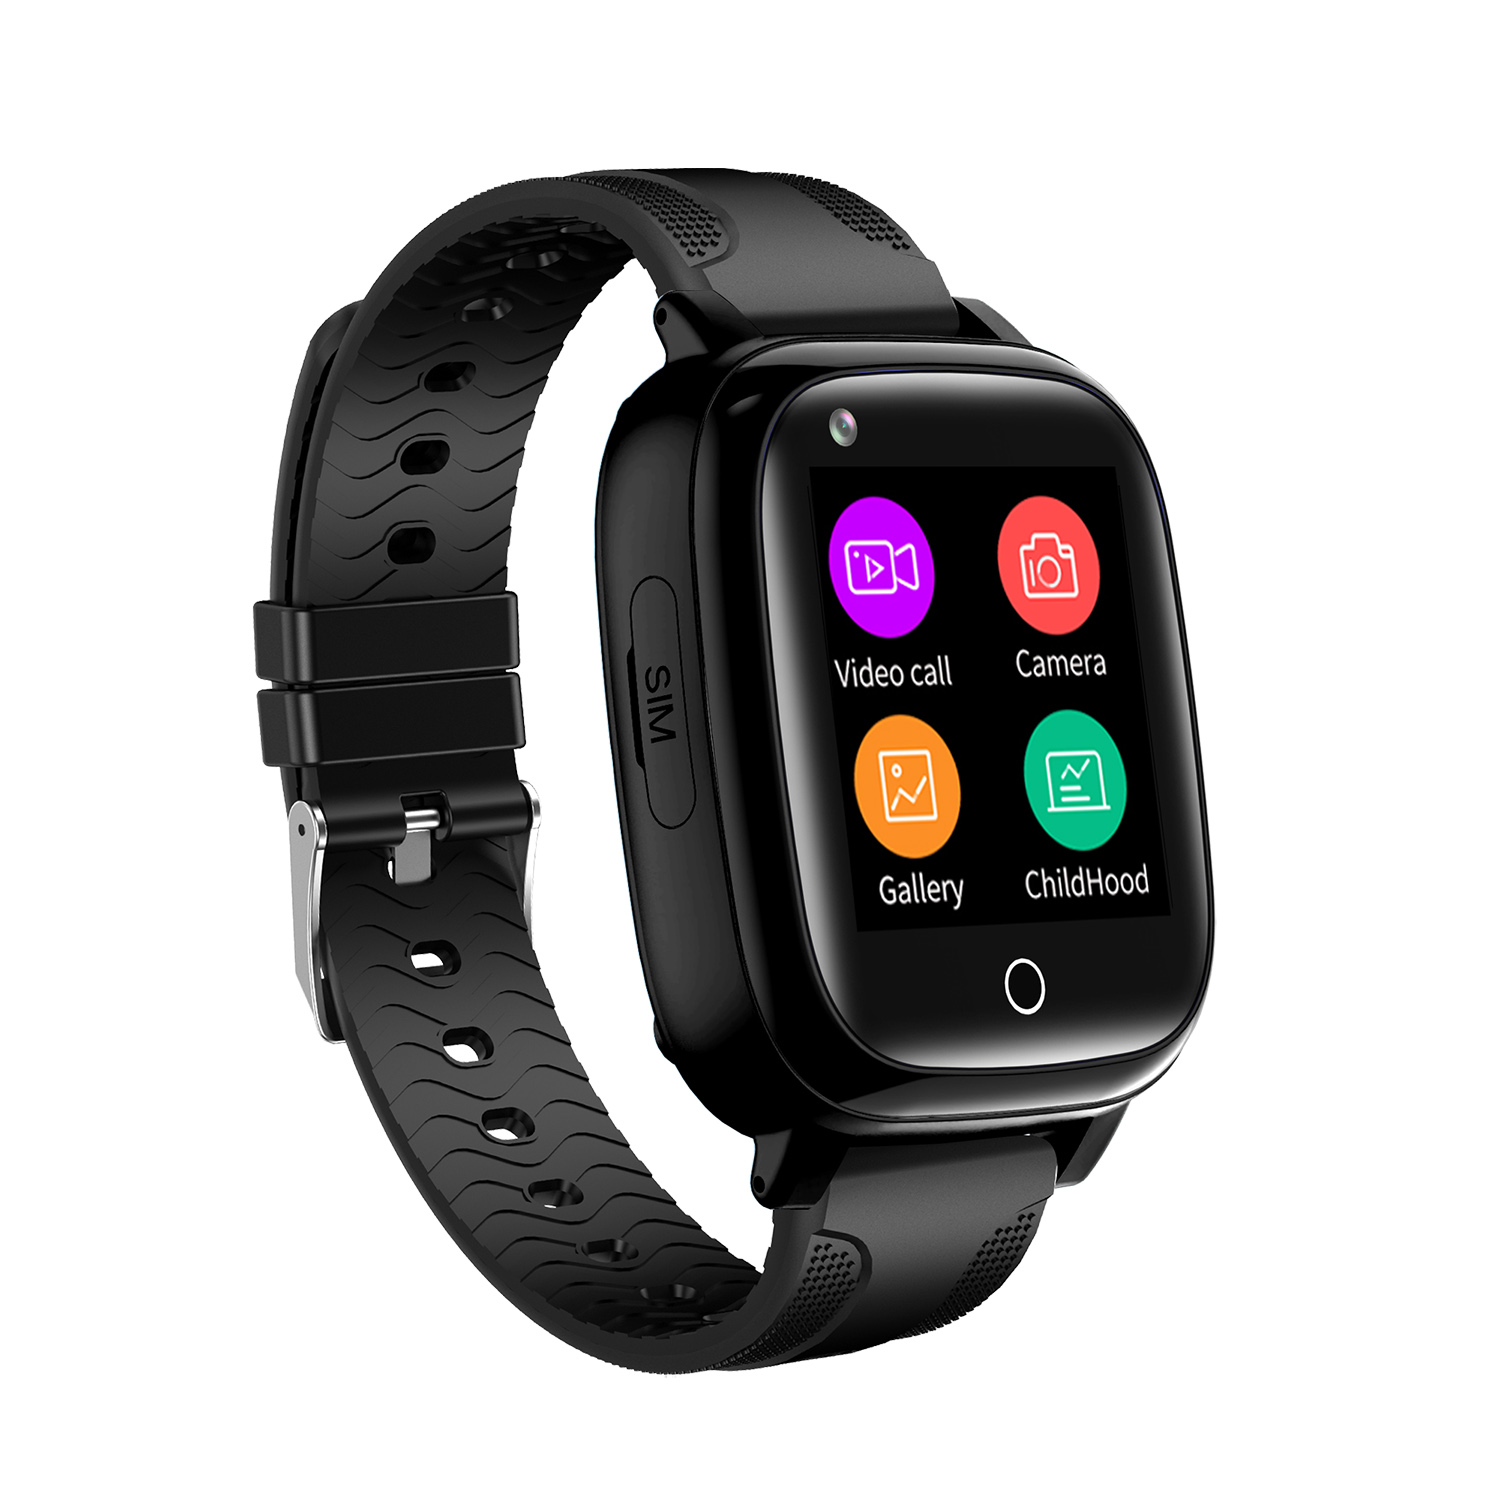 4G Android Child GPS Smart Watch with Healthcare Monitoring D4LK